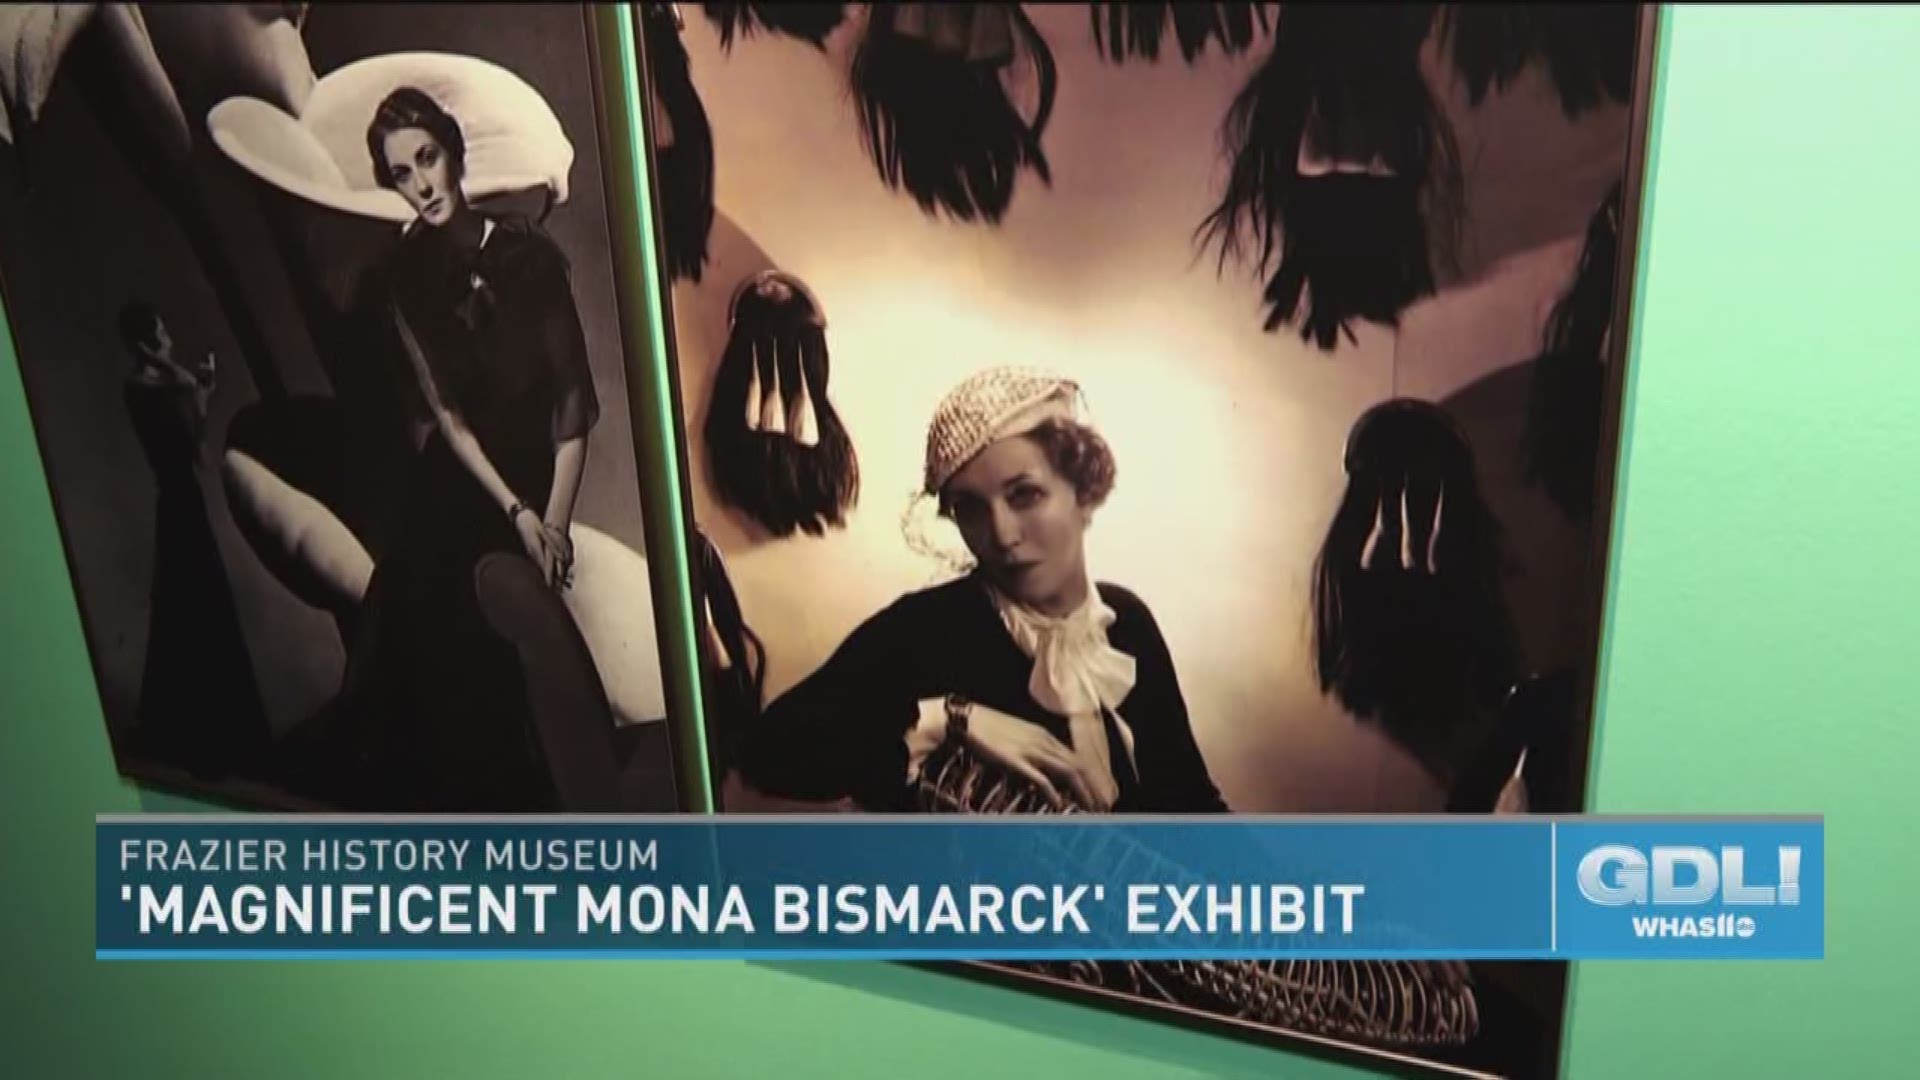 The Magnificent Mona Bismark Exhibit is open now through July 29, 2018 at the Frazier History Museum.